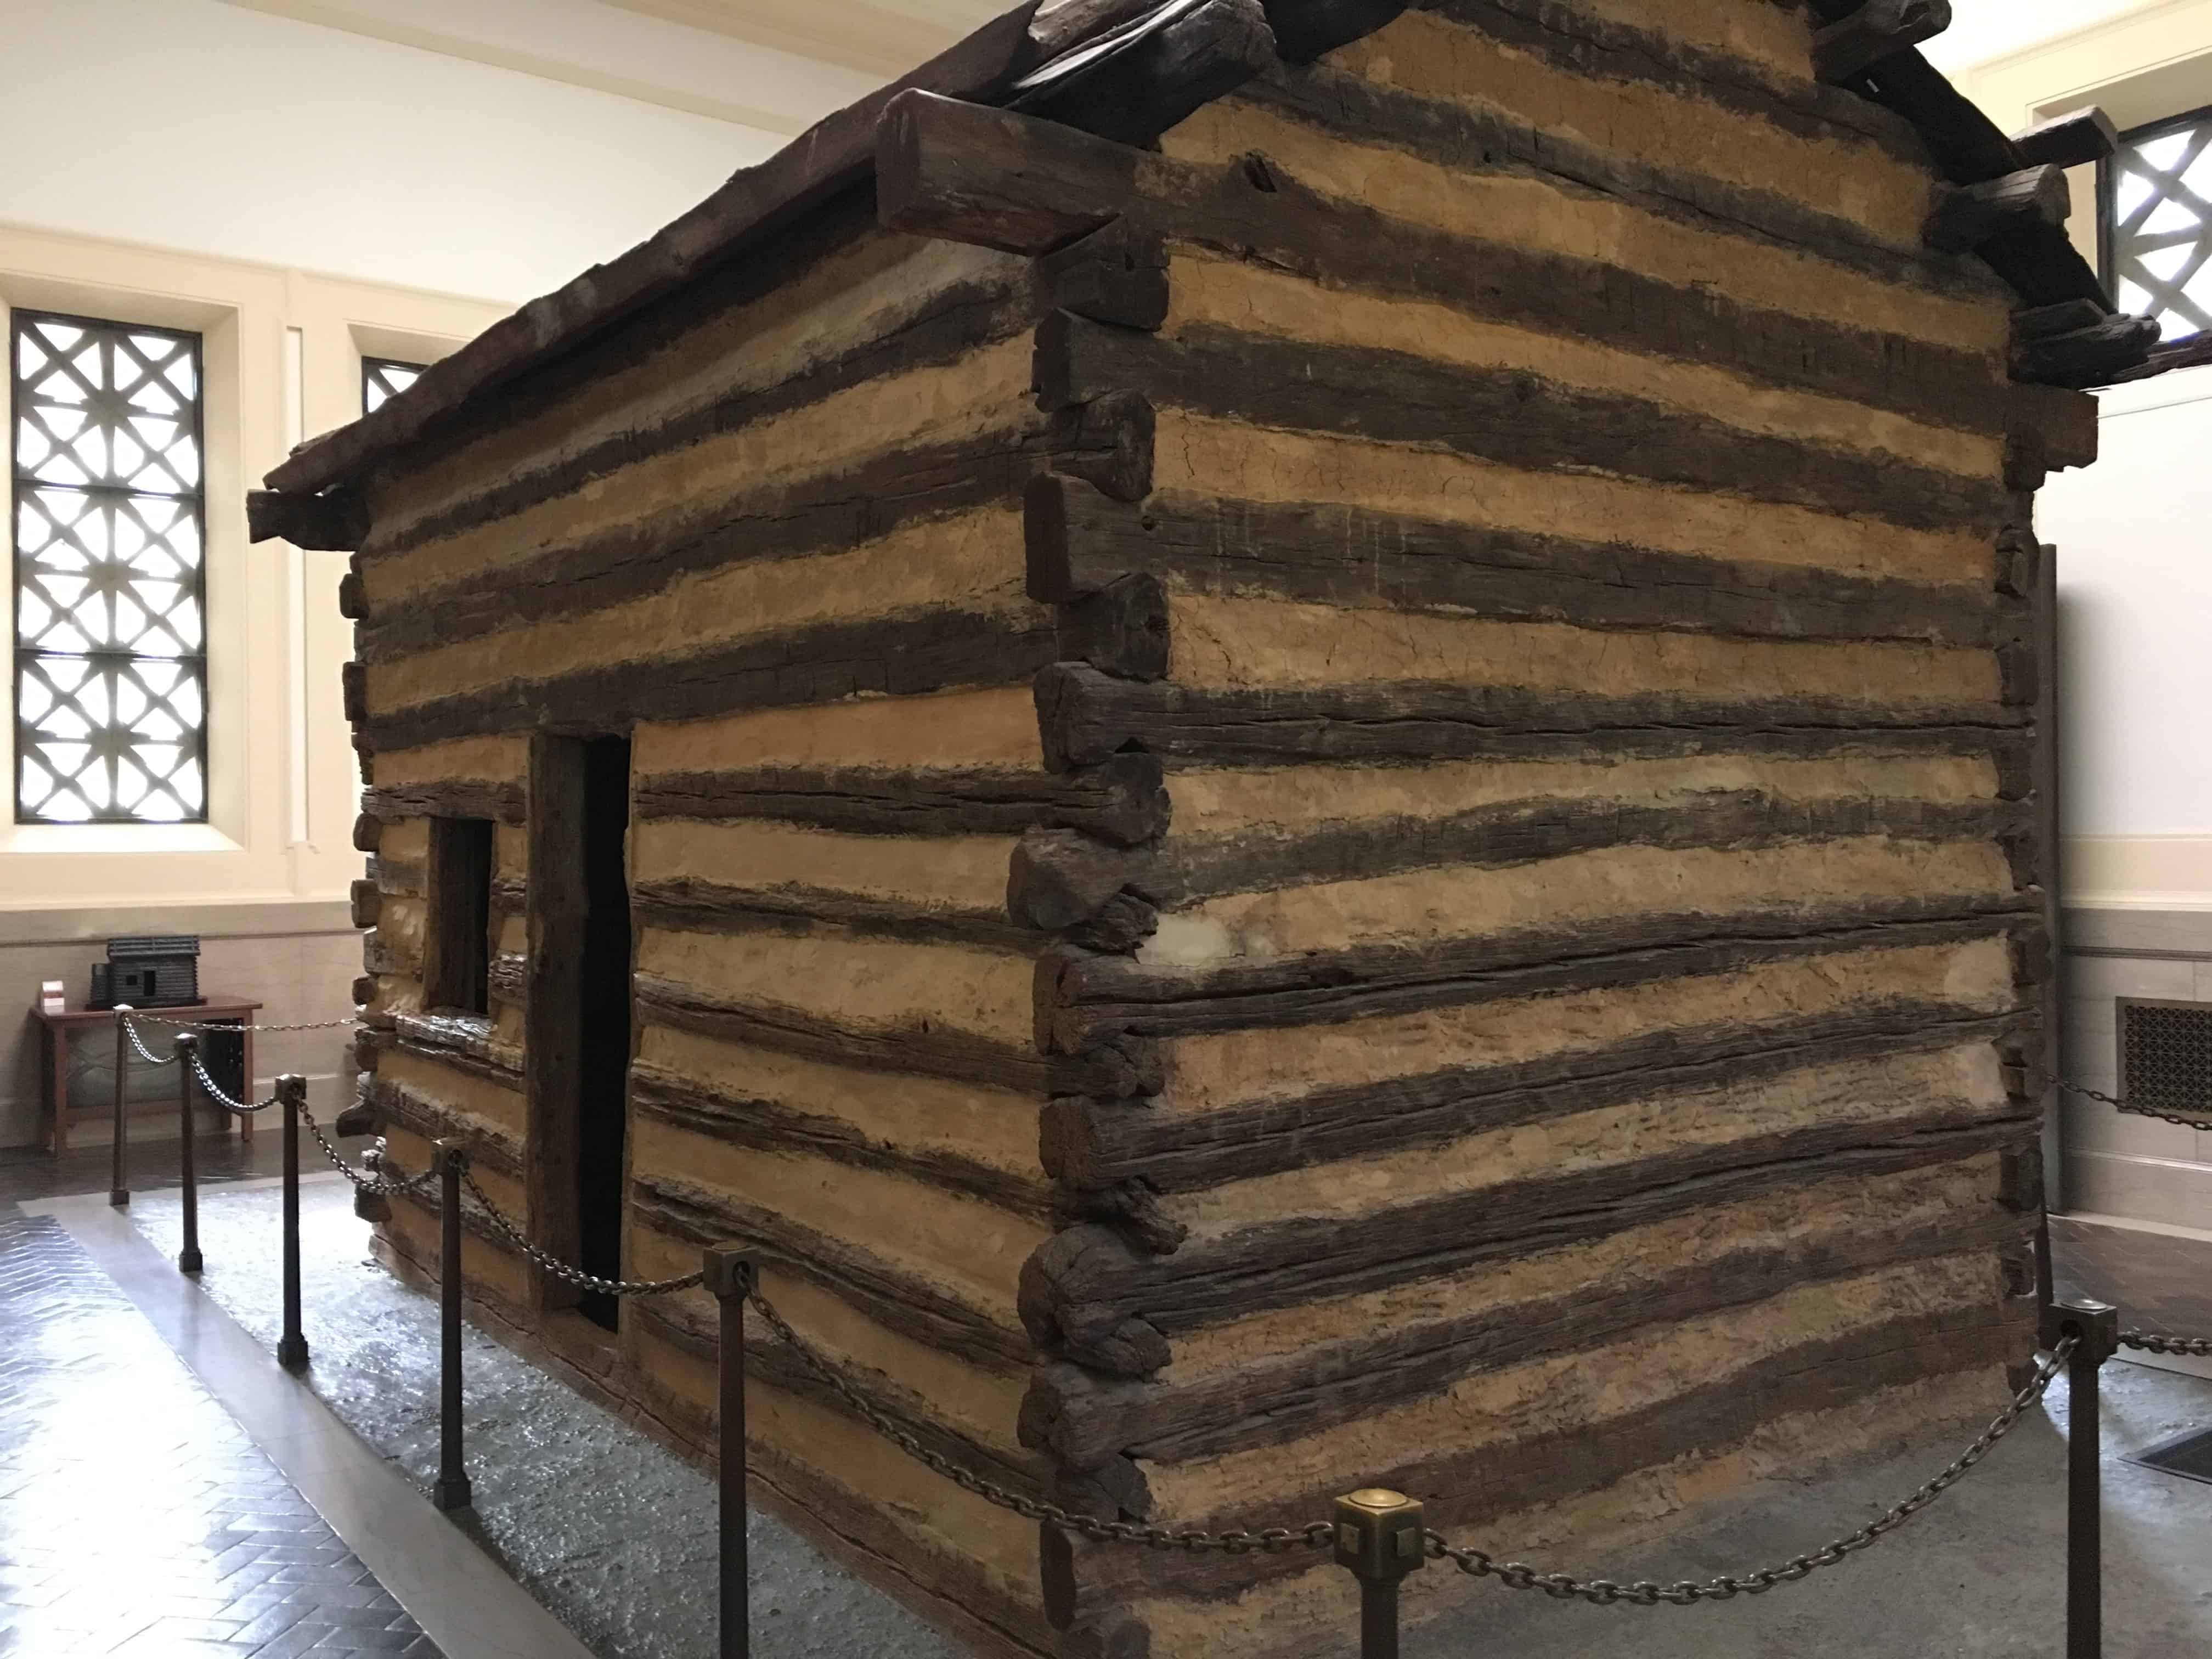 Symbolic "birth cabin" at Abraham Lincoln Birthplace National Historical Park in Kentucky